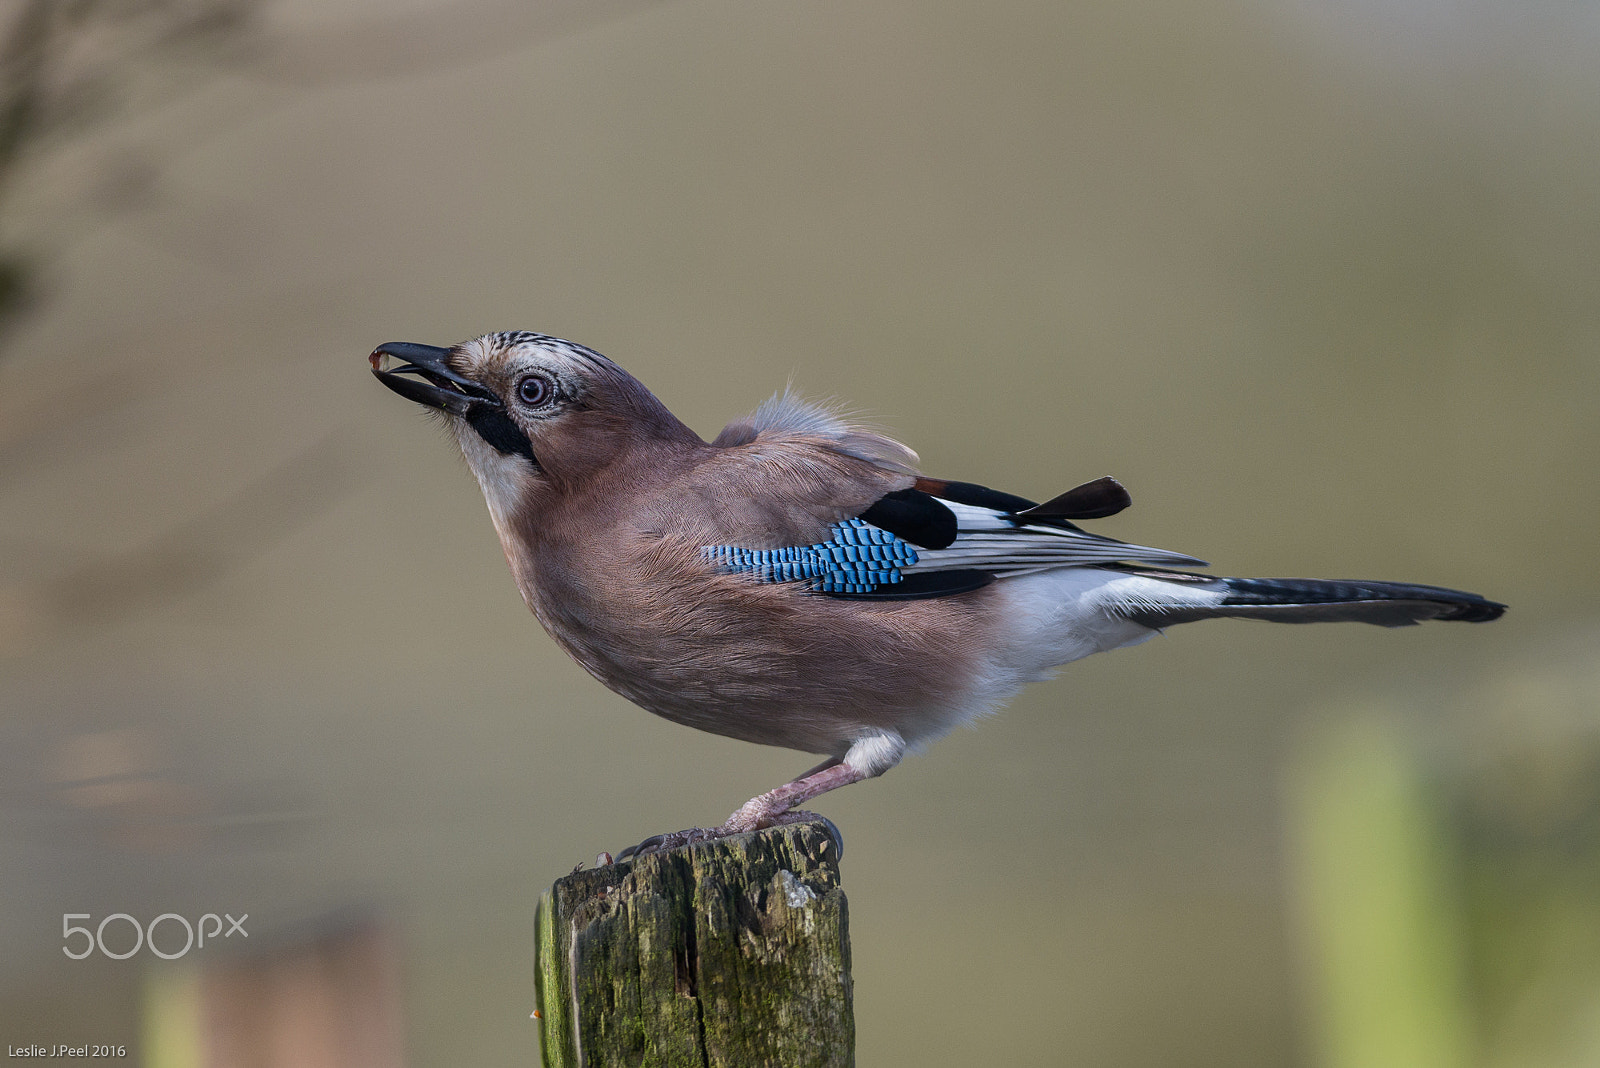 Nikon D800E sample photo. Jay on a fence post in daisy nook country park photography